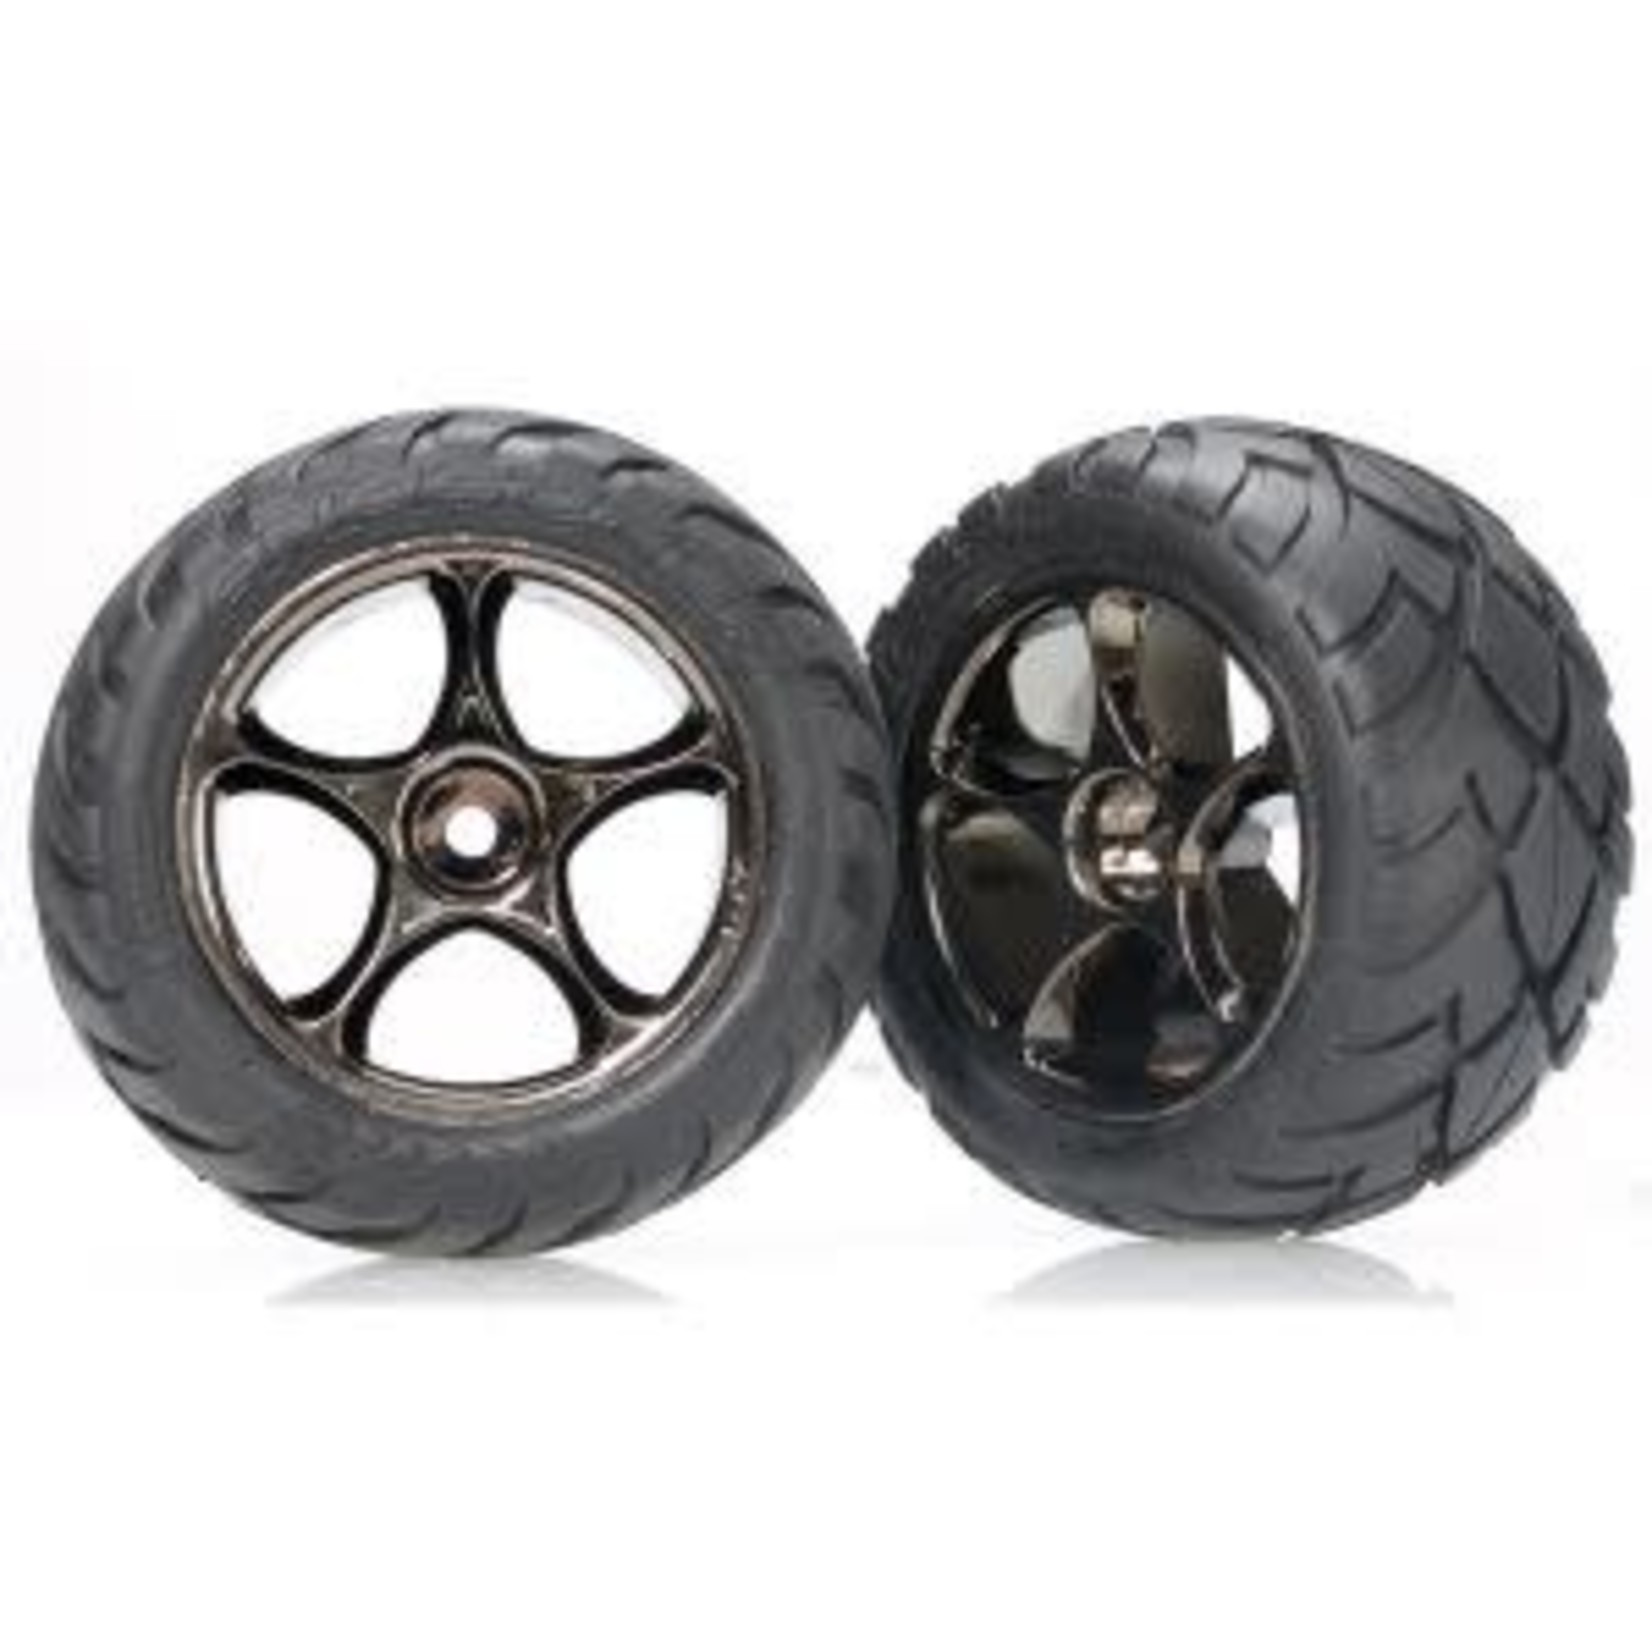 Traxxas 2478A Tires & wheels, assembled (Tracer 2.2" black chrome wheels, Anaconda® 2.2" tires with foam inserts) (2) (Bandit® rear)